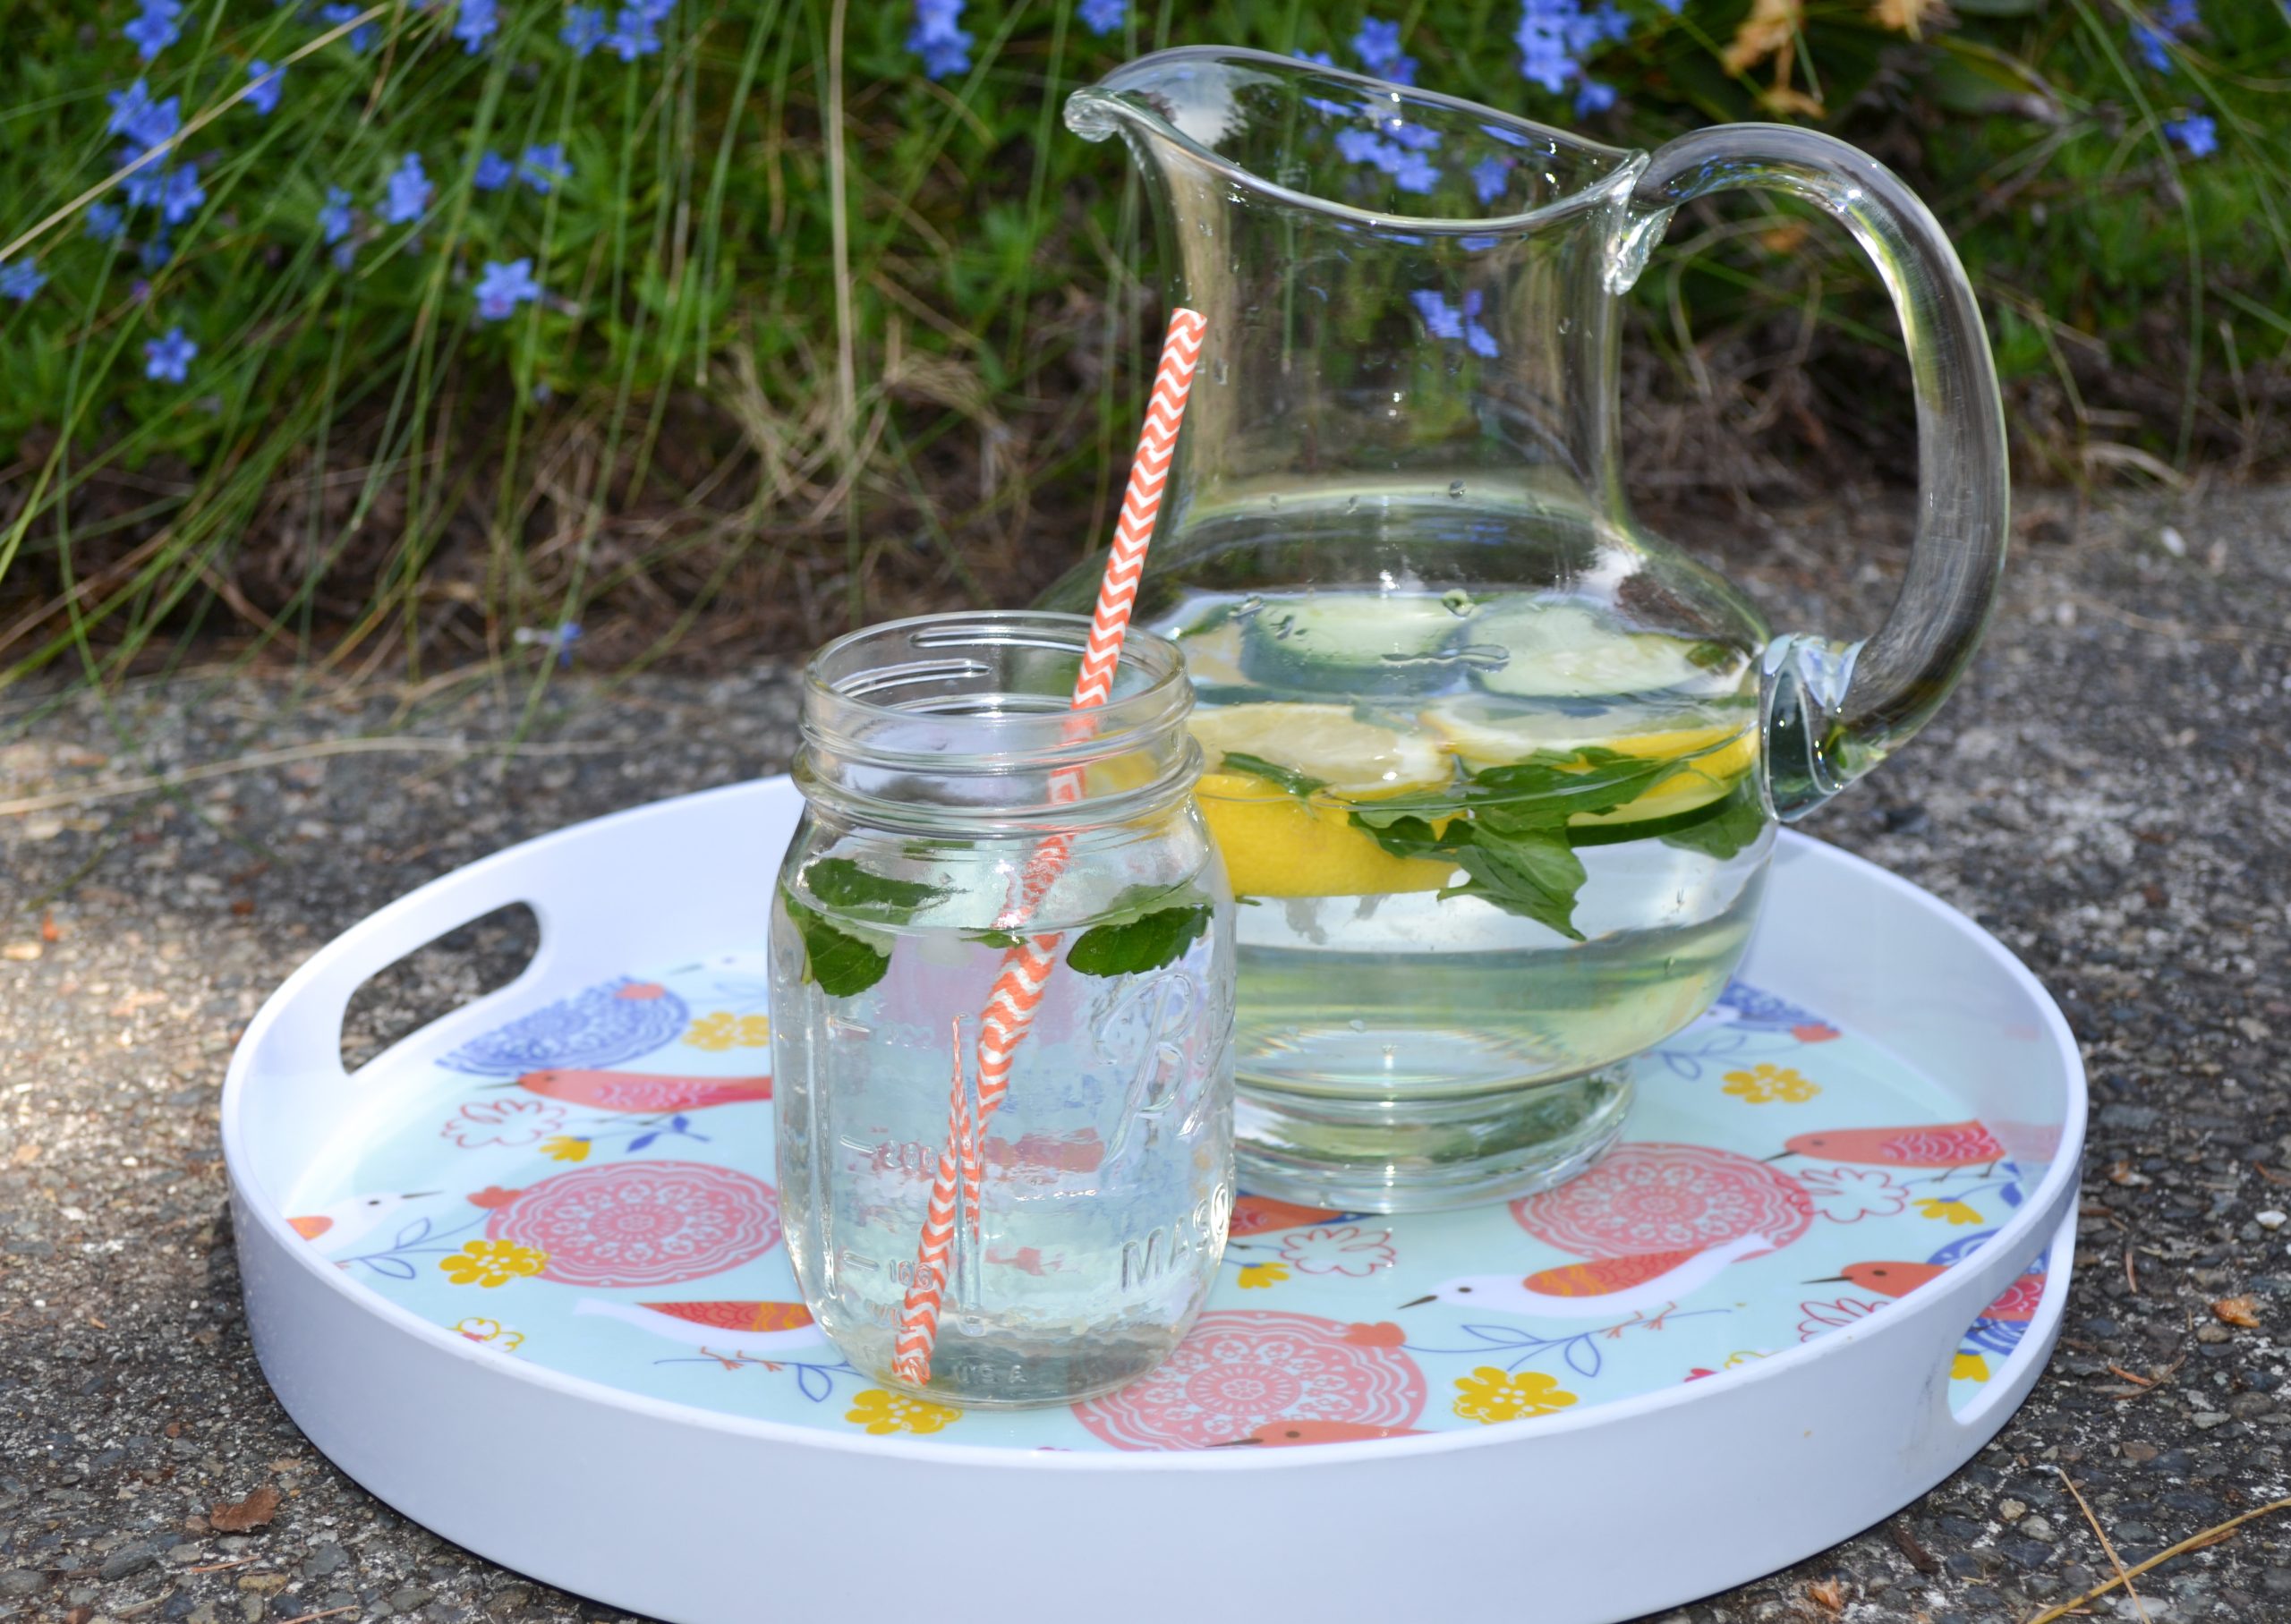 Make a pitcher of healthy flavored water.